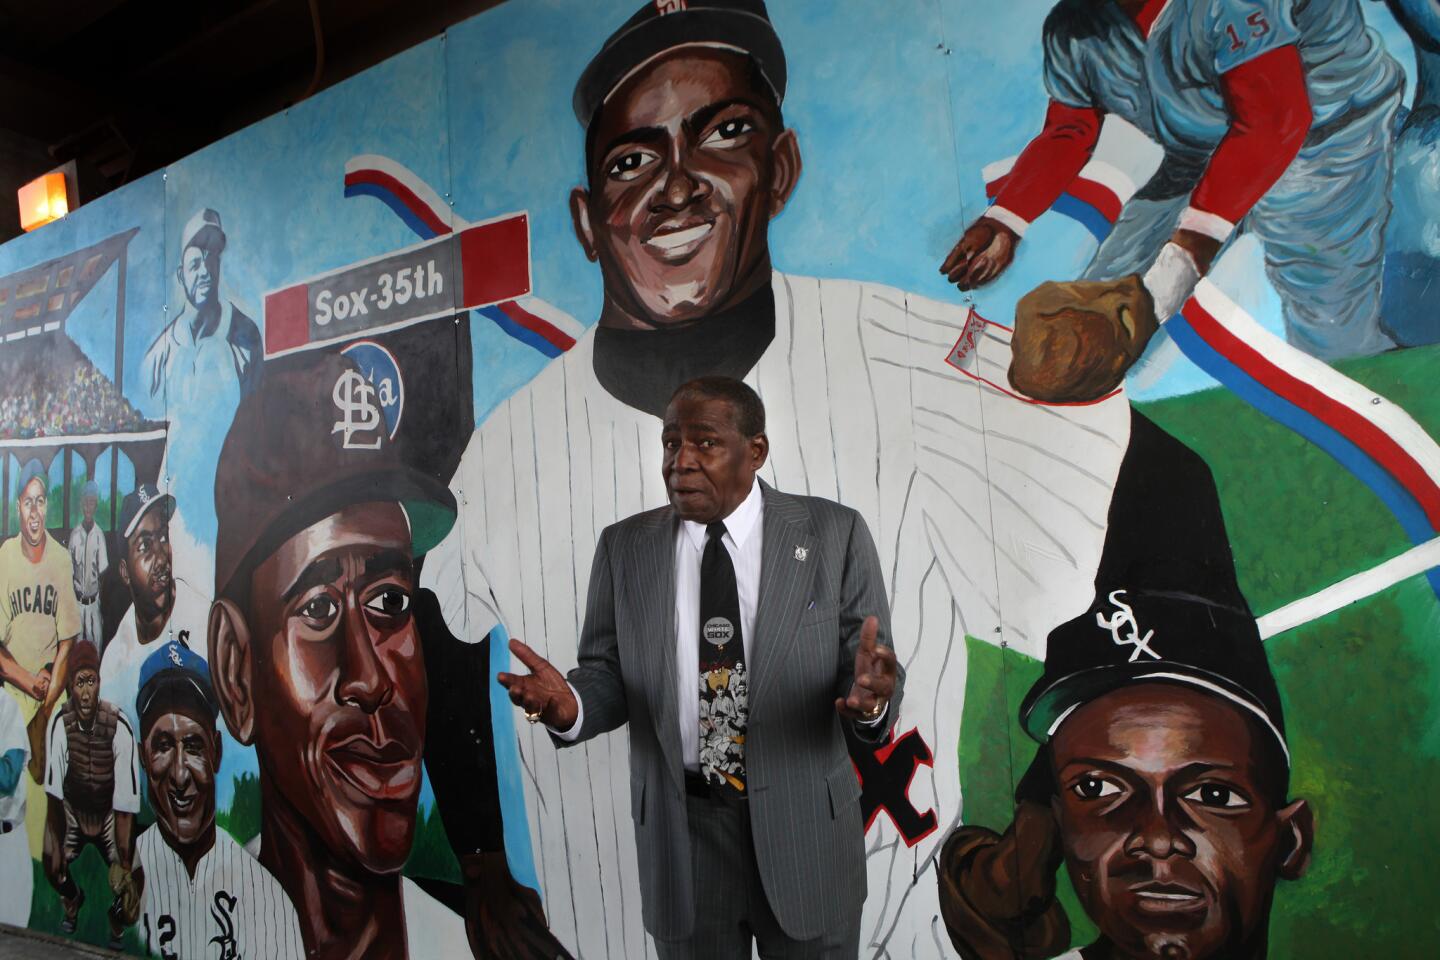 White Sox great Minnie Minoso, 82, visits the mural that features him prominently as the largest figure (see player directly behind him) in a series of African American ballplayers that was unveiled on 35th Street below the Metra tracks at Federal.